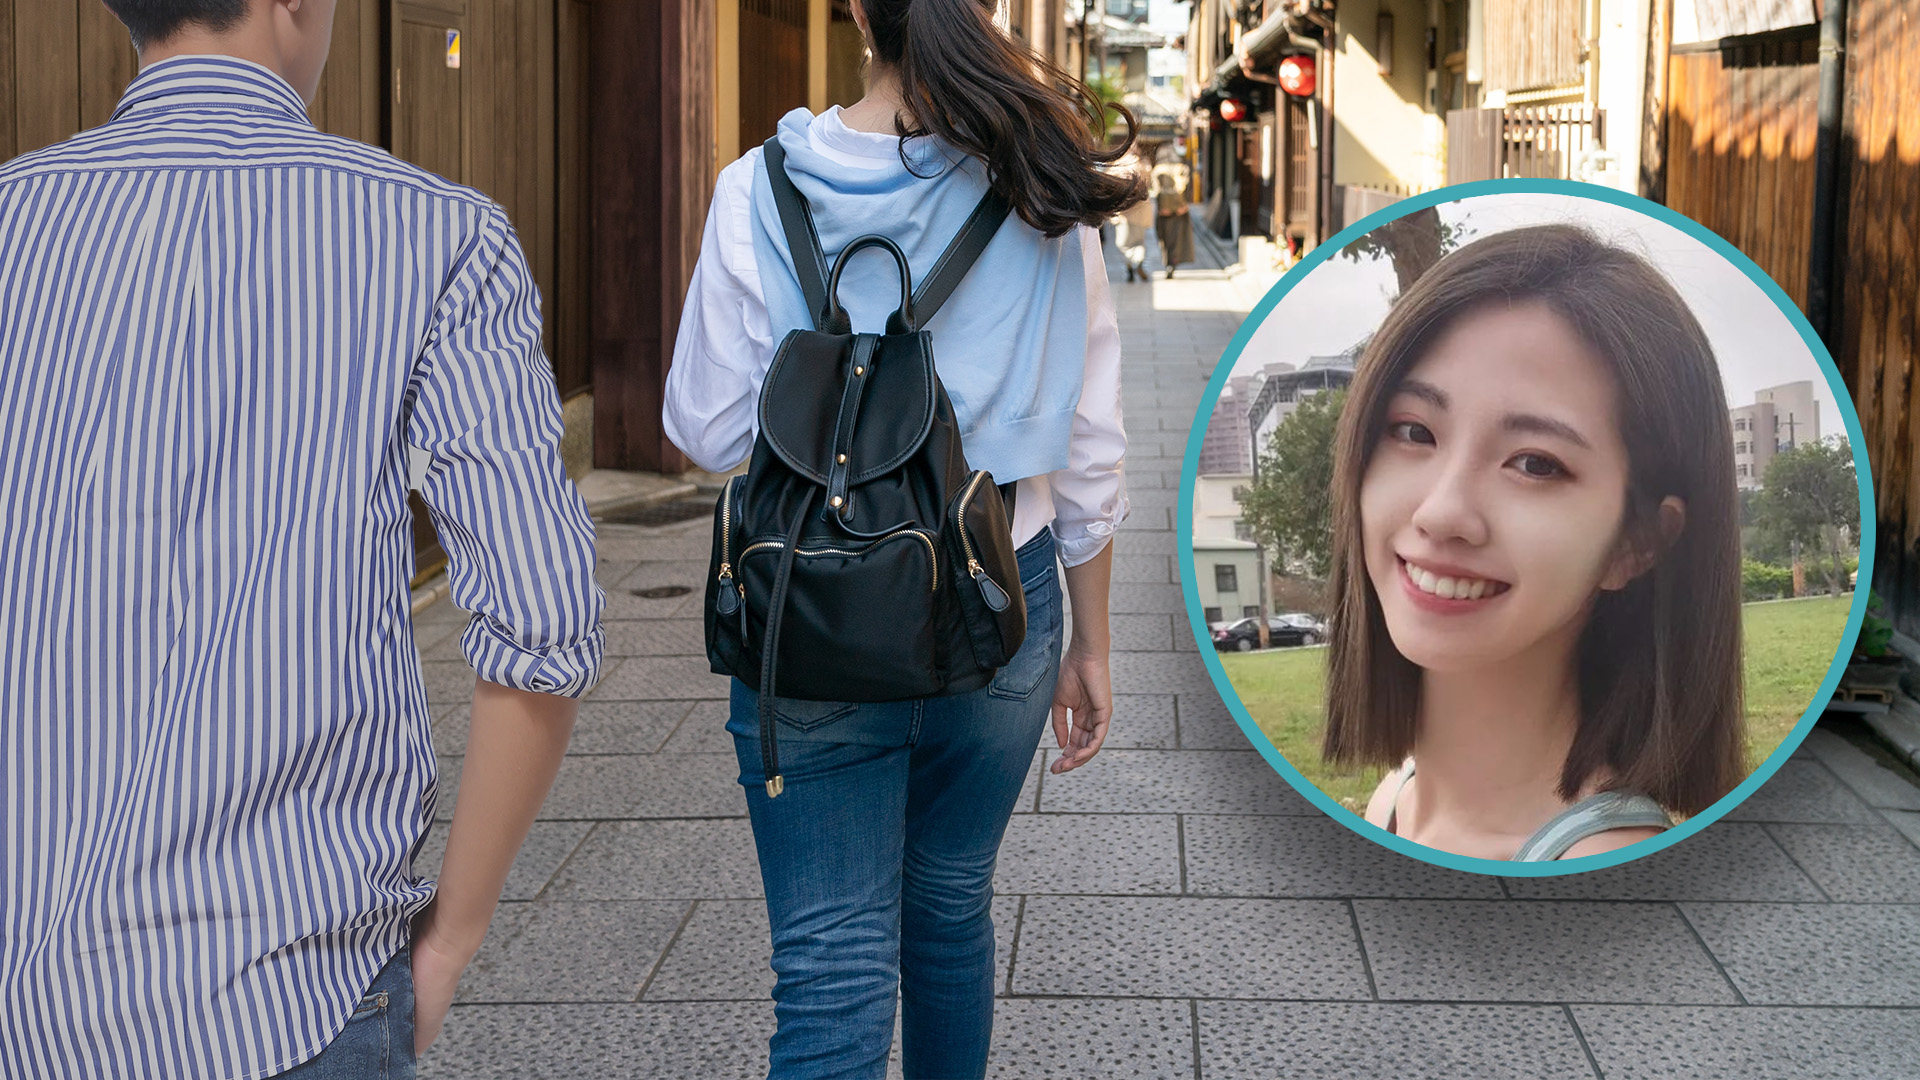 A woman from Taiwan has sparked much amusement on social media after she kicked a drunken sex pest in the groin while on holiday in Japan. Photo: SCMP composite/Shutterstock/IG@Chihning